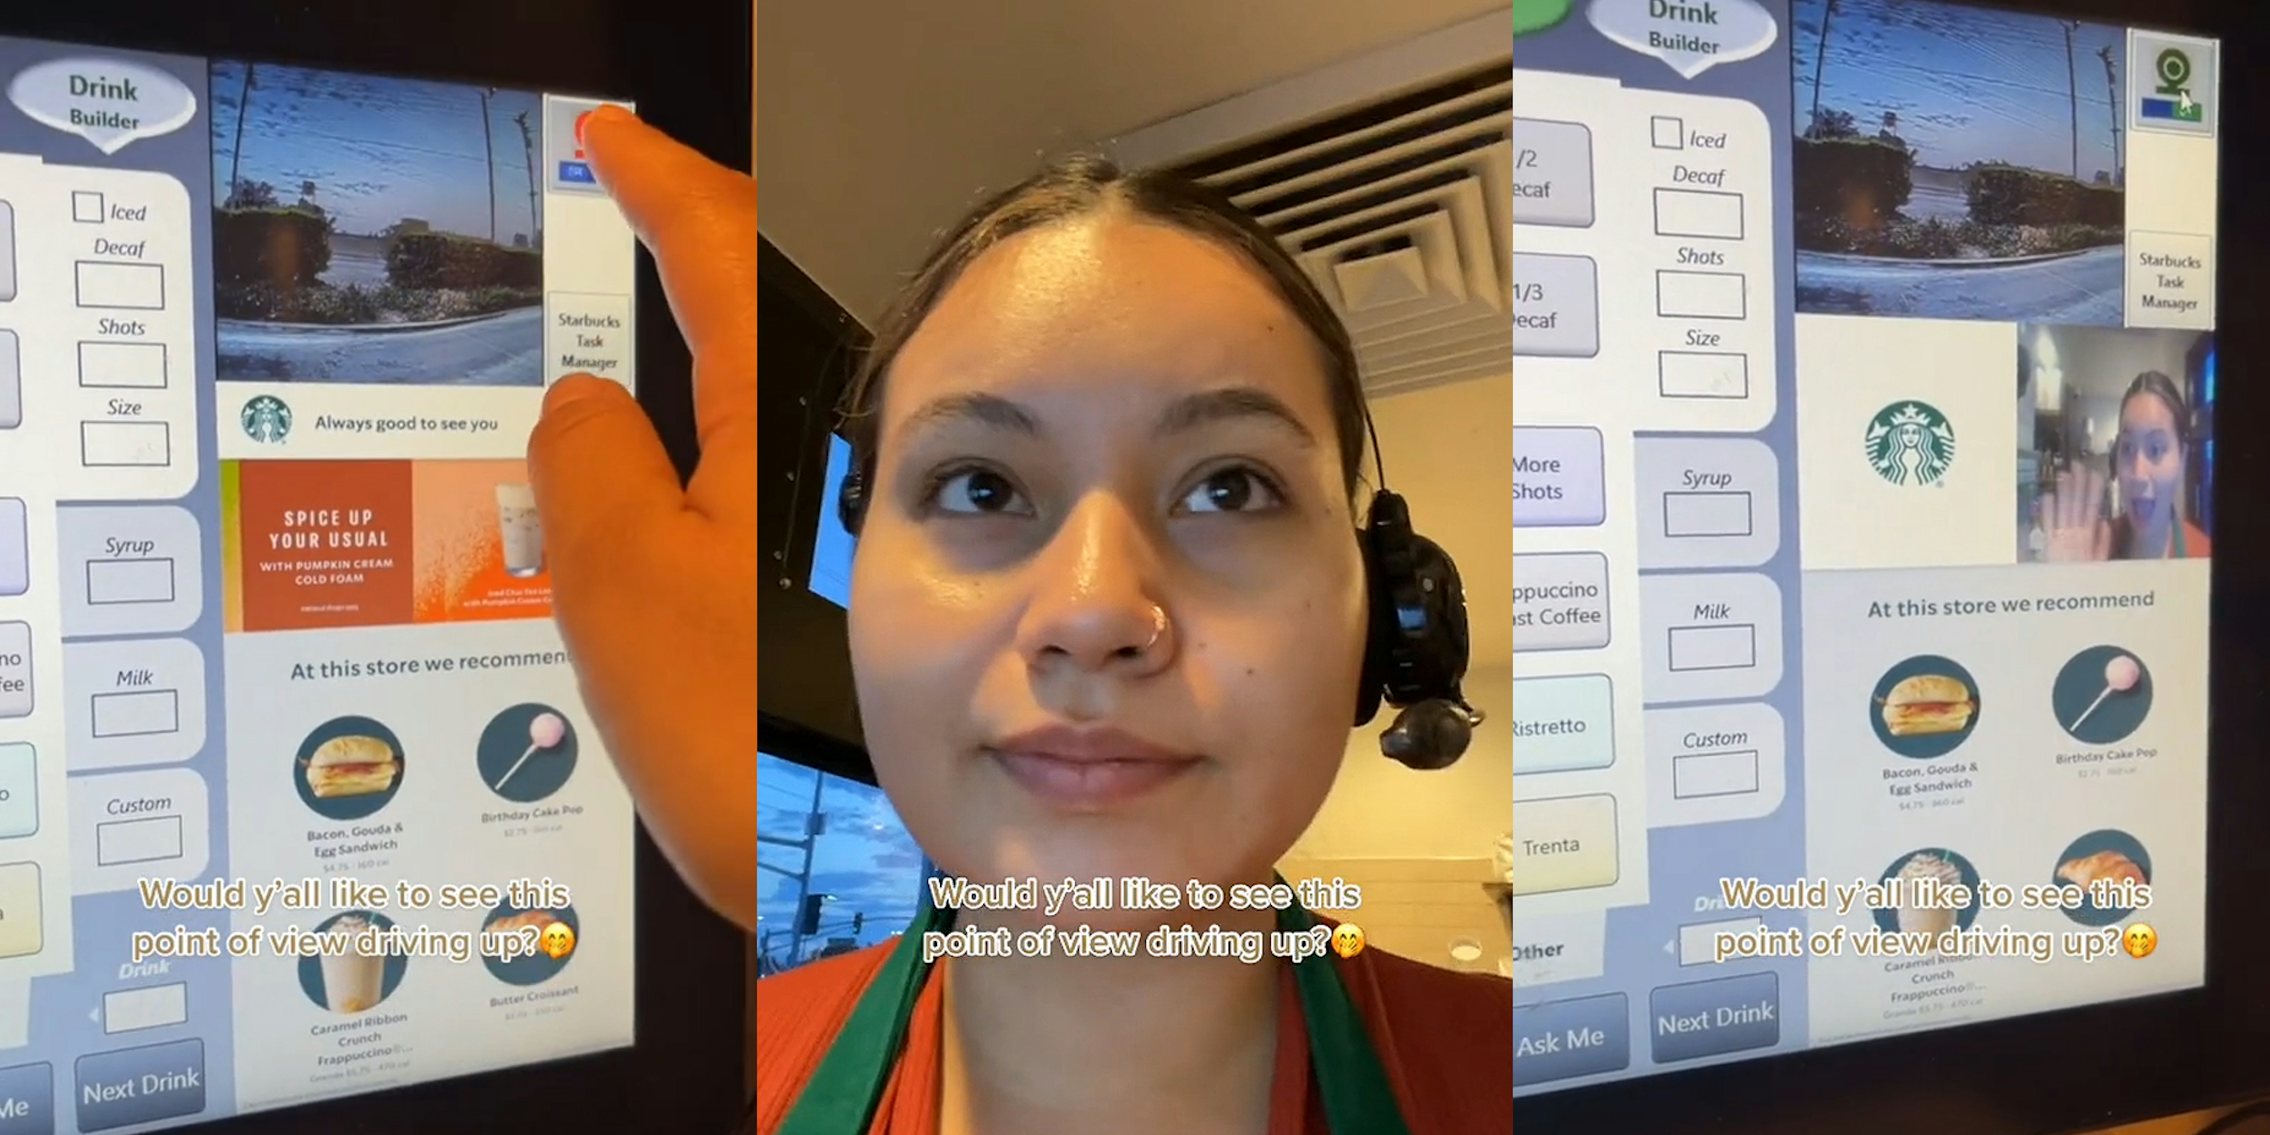 Starbucks touch screen order system for drive thru with worker pressing camera button caption 'Would y'all like to see this point of view driving up?' (l) Starbucks worker with headset on caption 'Would y'all like to see this point of view driving up?' (c) Starbucks touch screen order system for drive thru with worker waving in camera caption 'Would y'all like to see this point of view driving up?' (r)